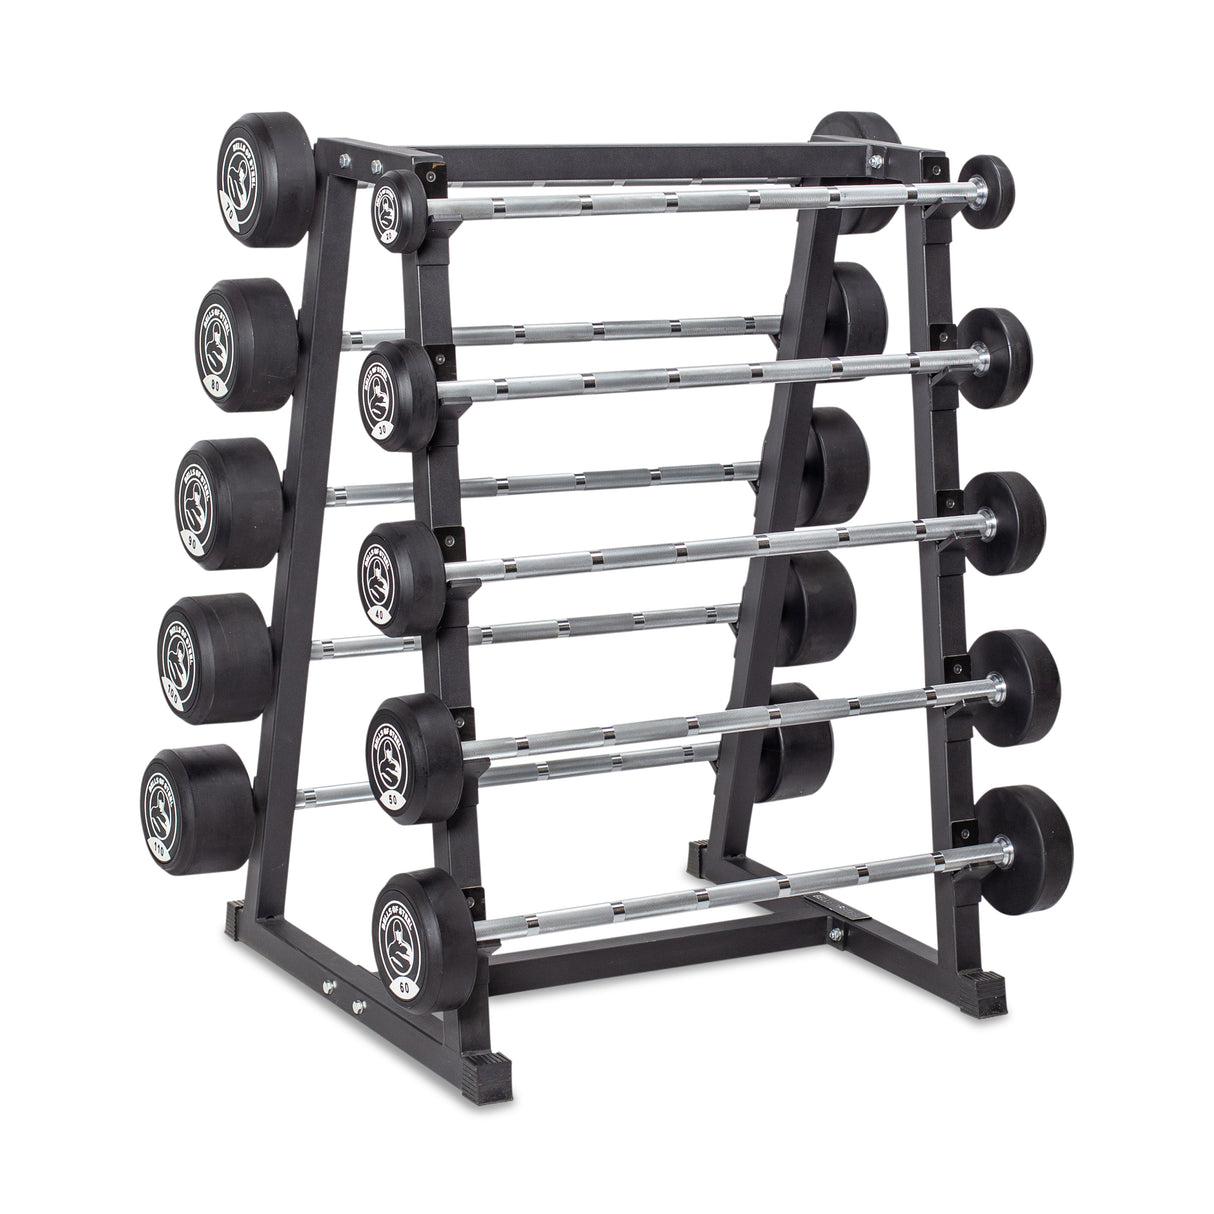 Fixed Barbells - Straight Handle - 20-110 LB Set with Rack